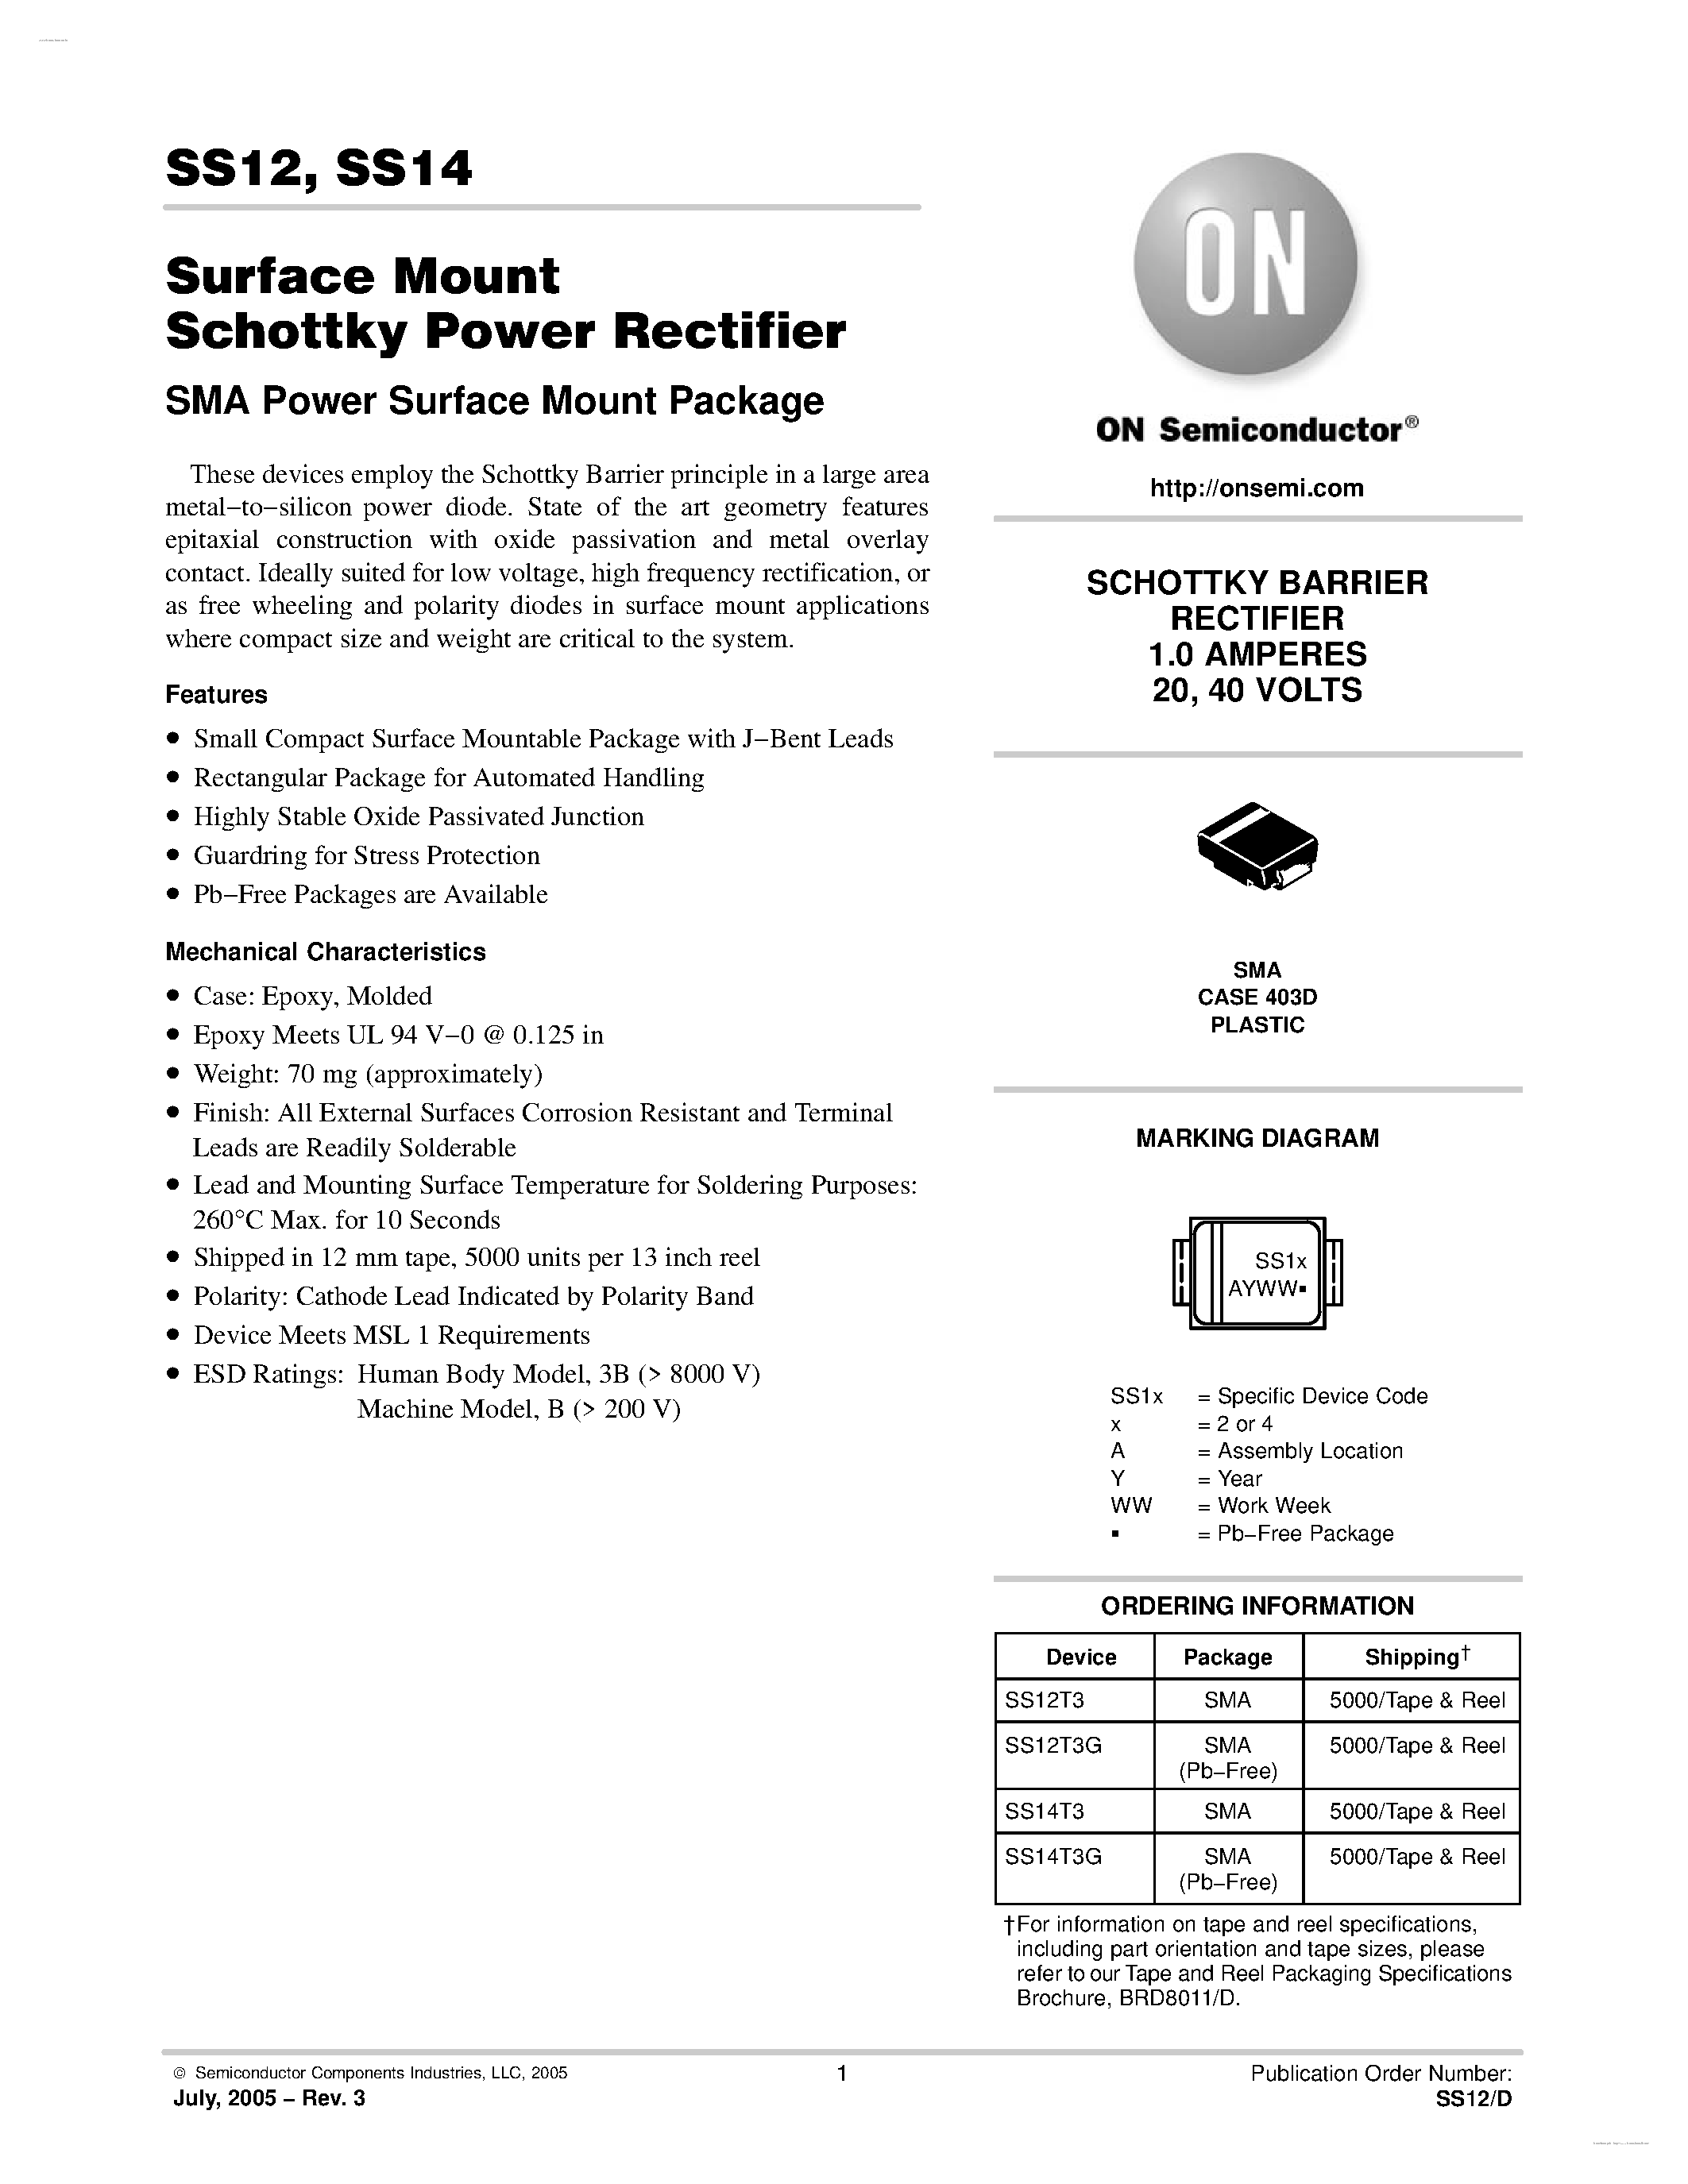 Даташит SS12 - (SS12 / SS14) Surface Mount Schottky Power Rectifier страница 1